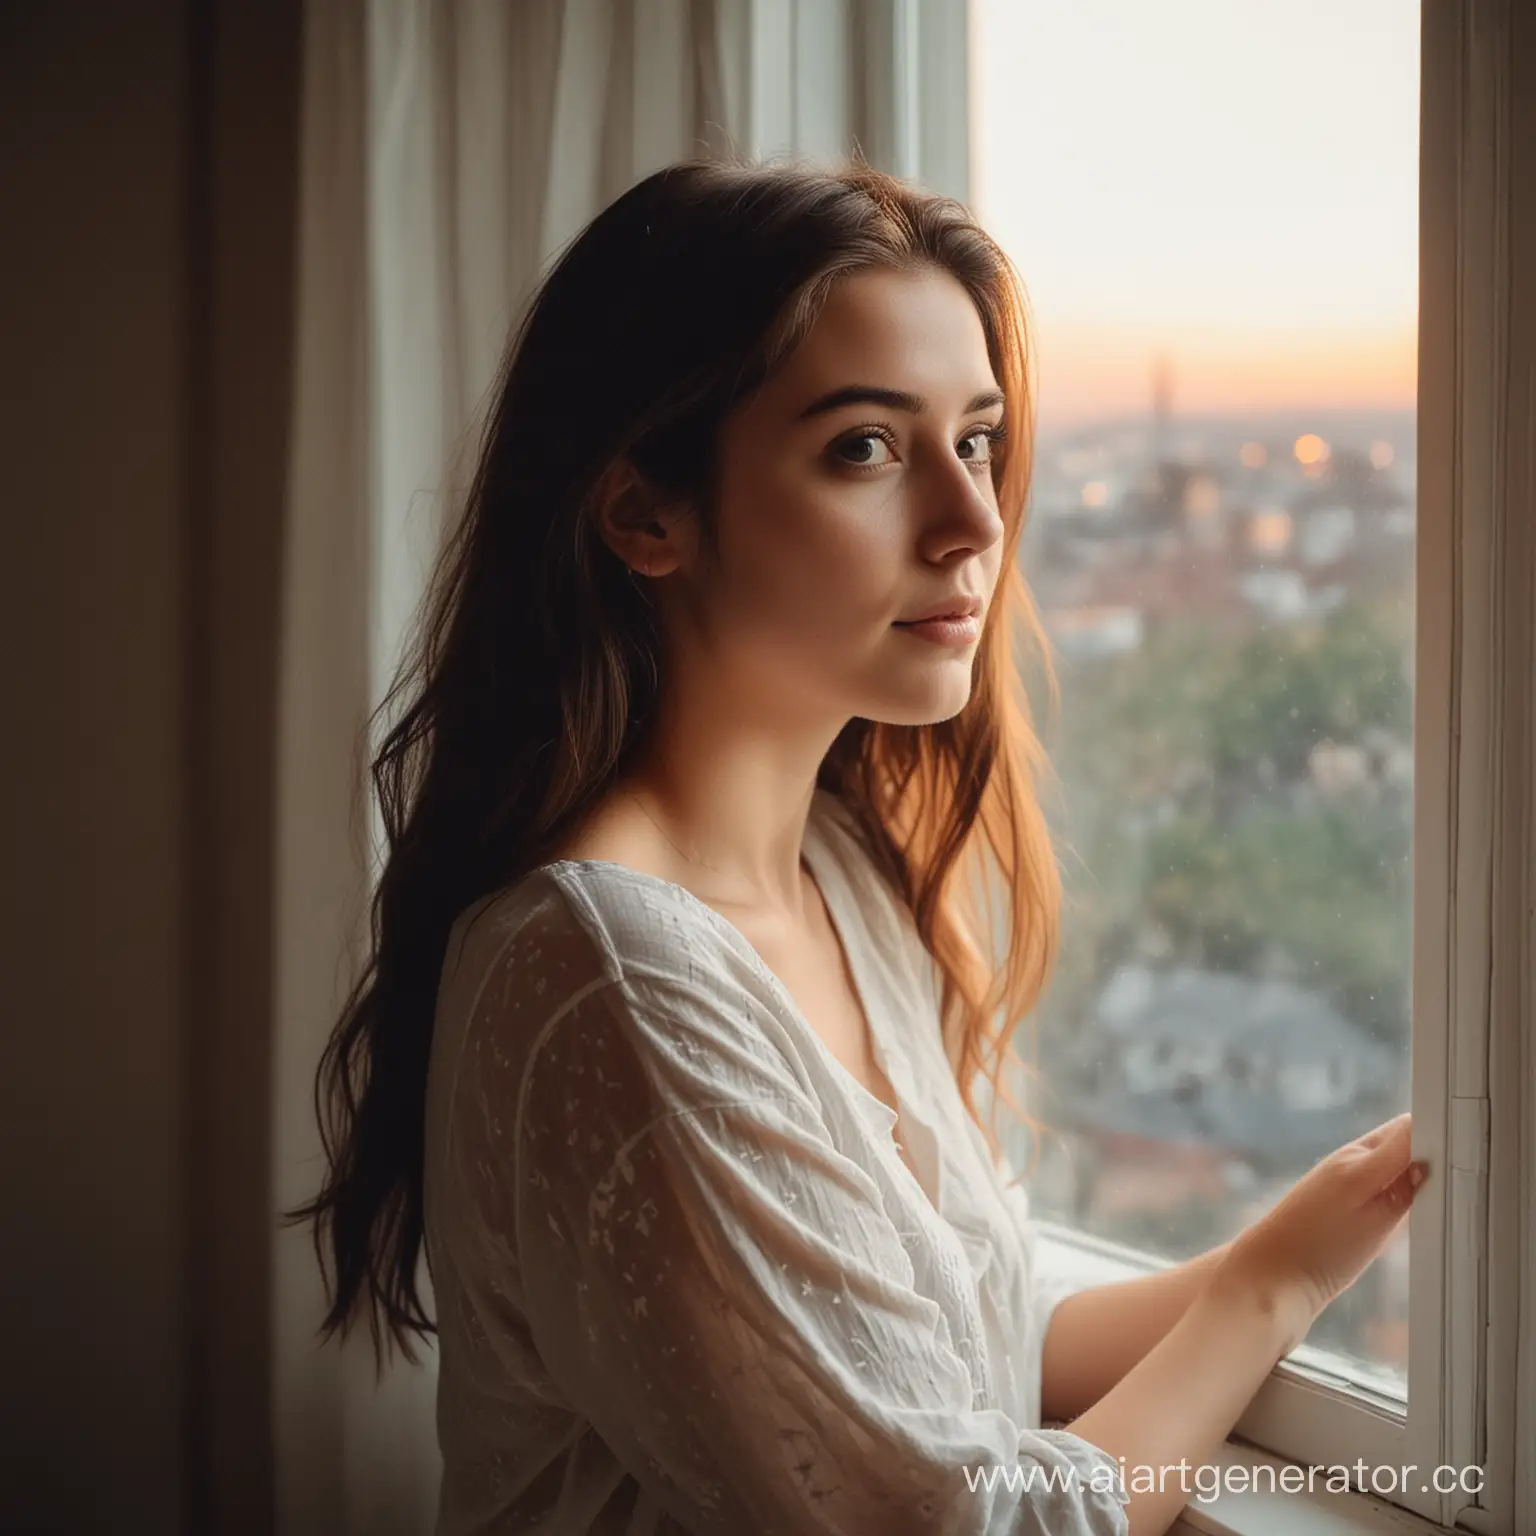 Gorgeous-Young-Woman-25-Captivated-by-Twilight-Through-Window